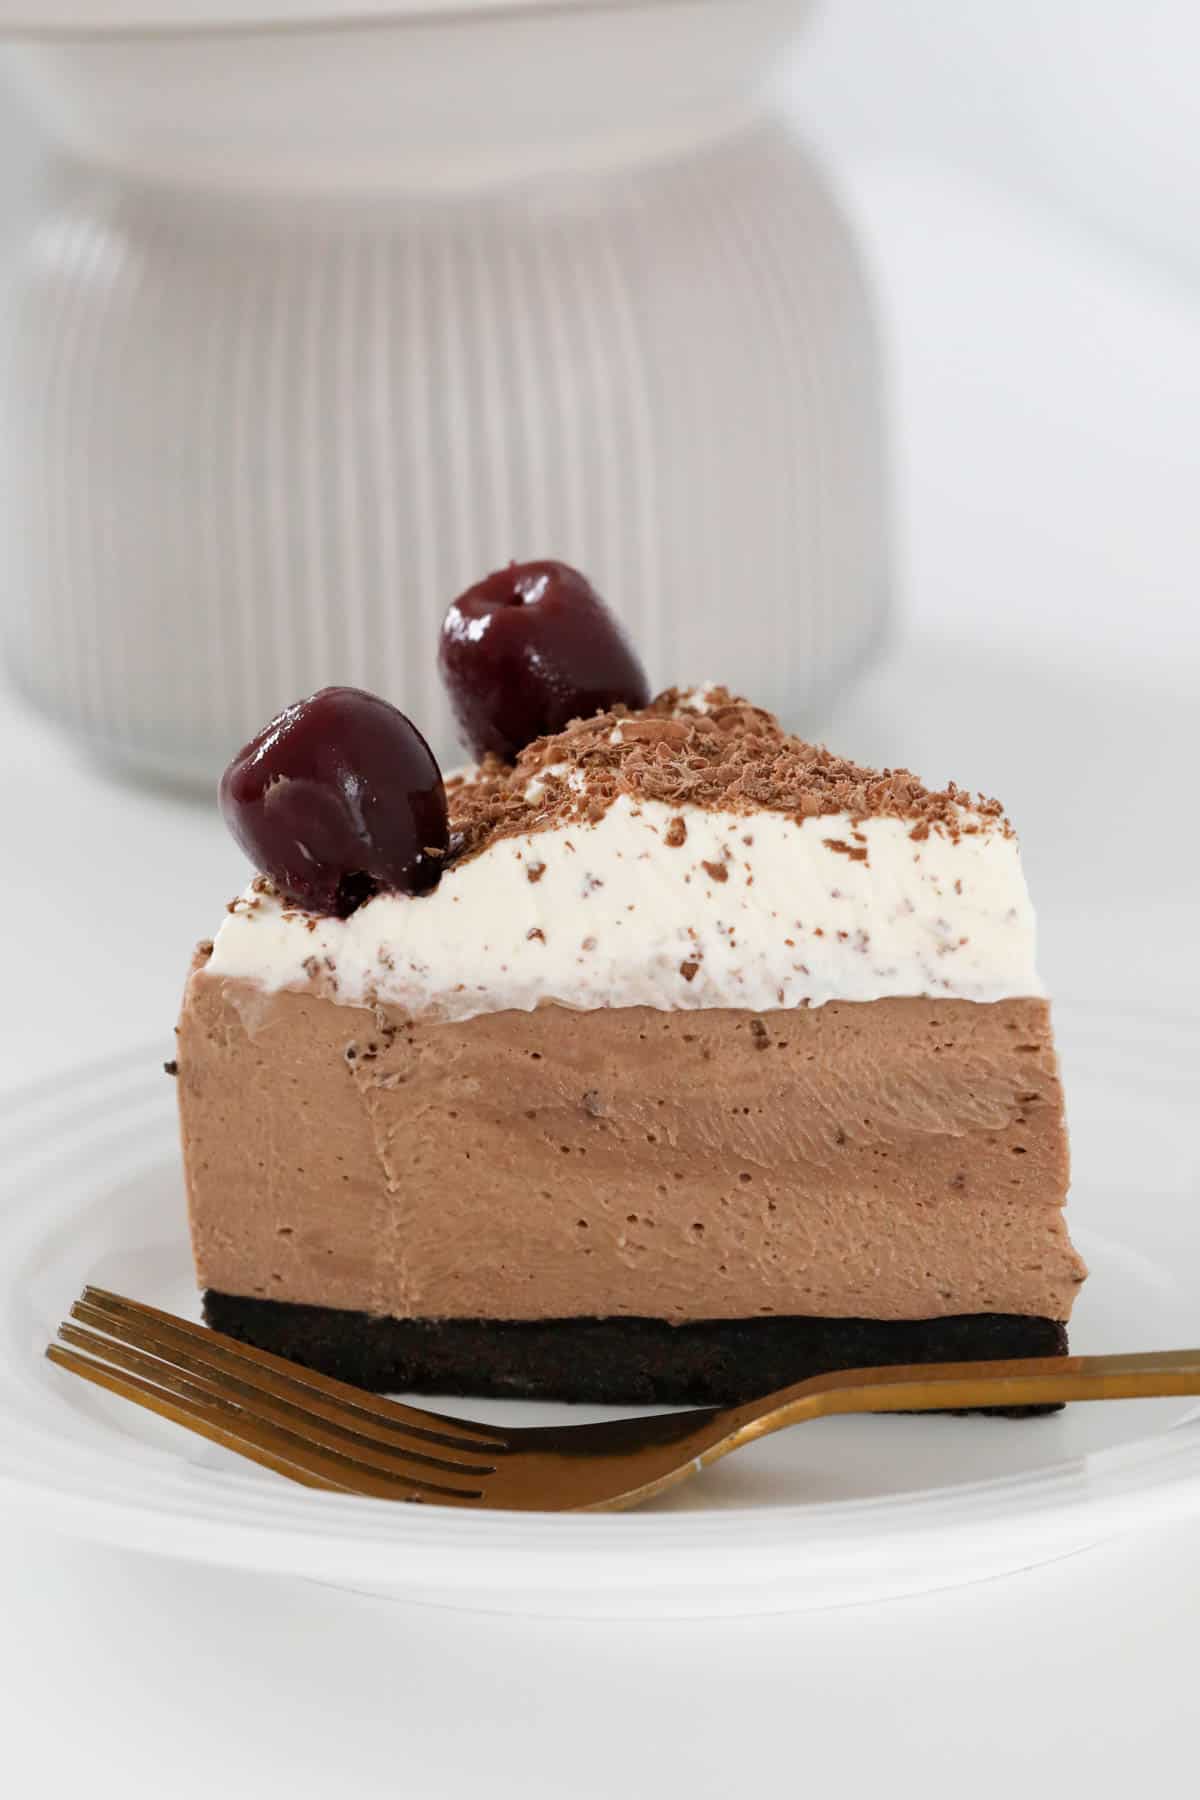 Side view of chocolate cheesecake with cream, black cherries and chocolate on top.